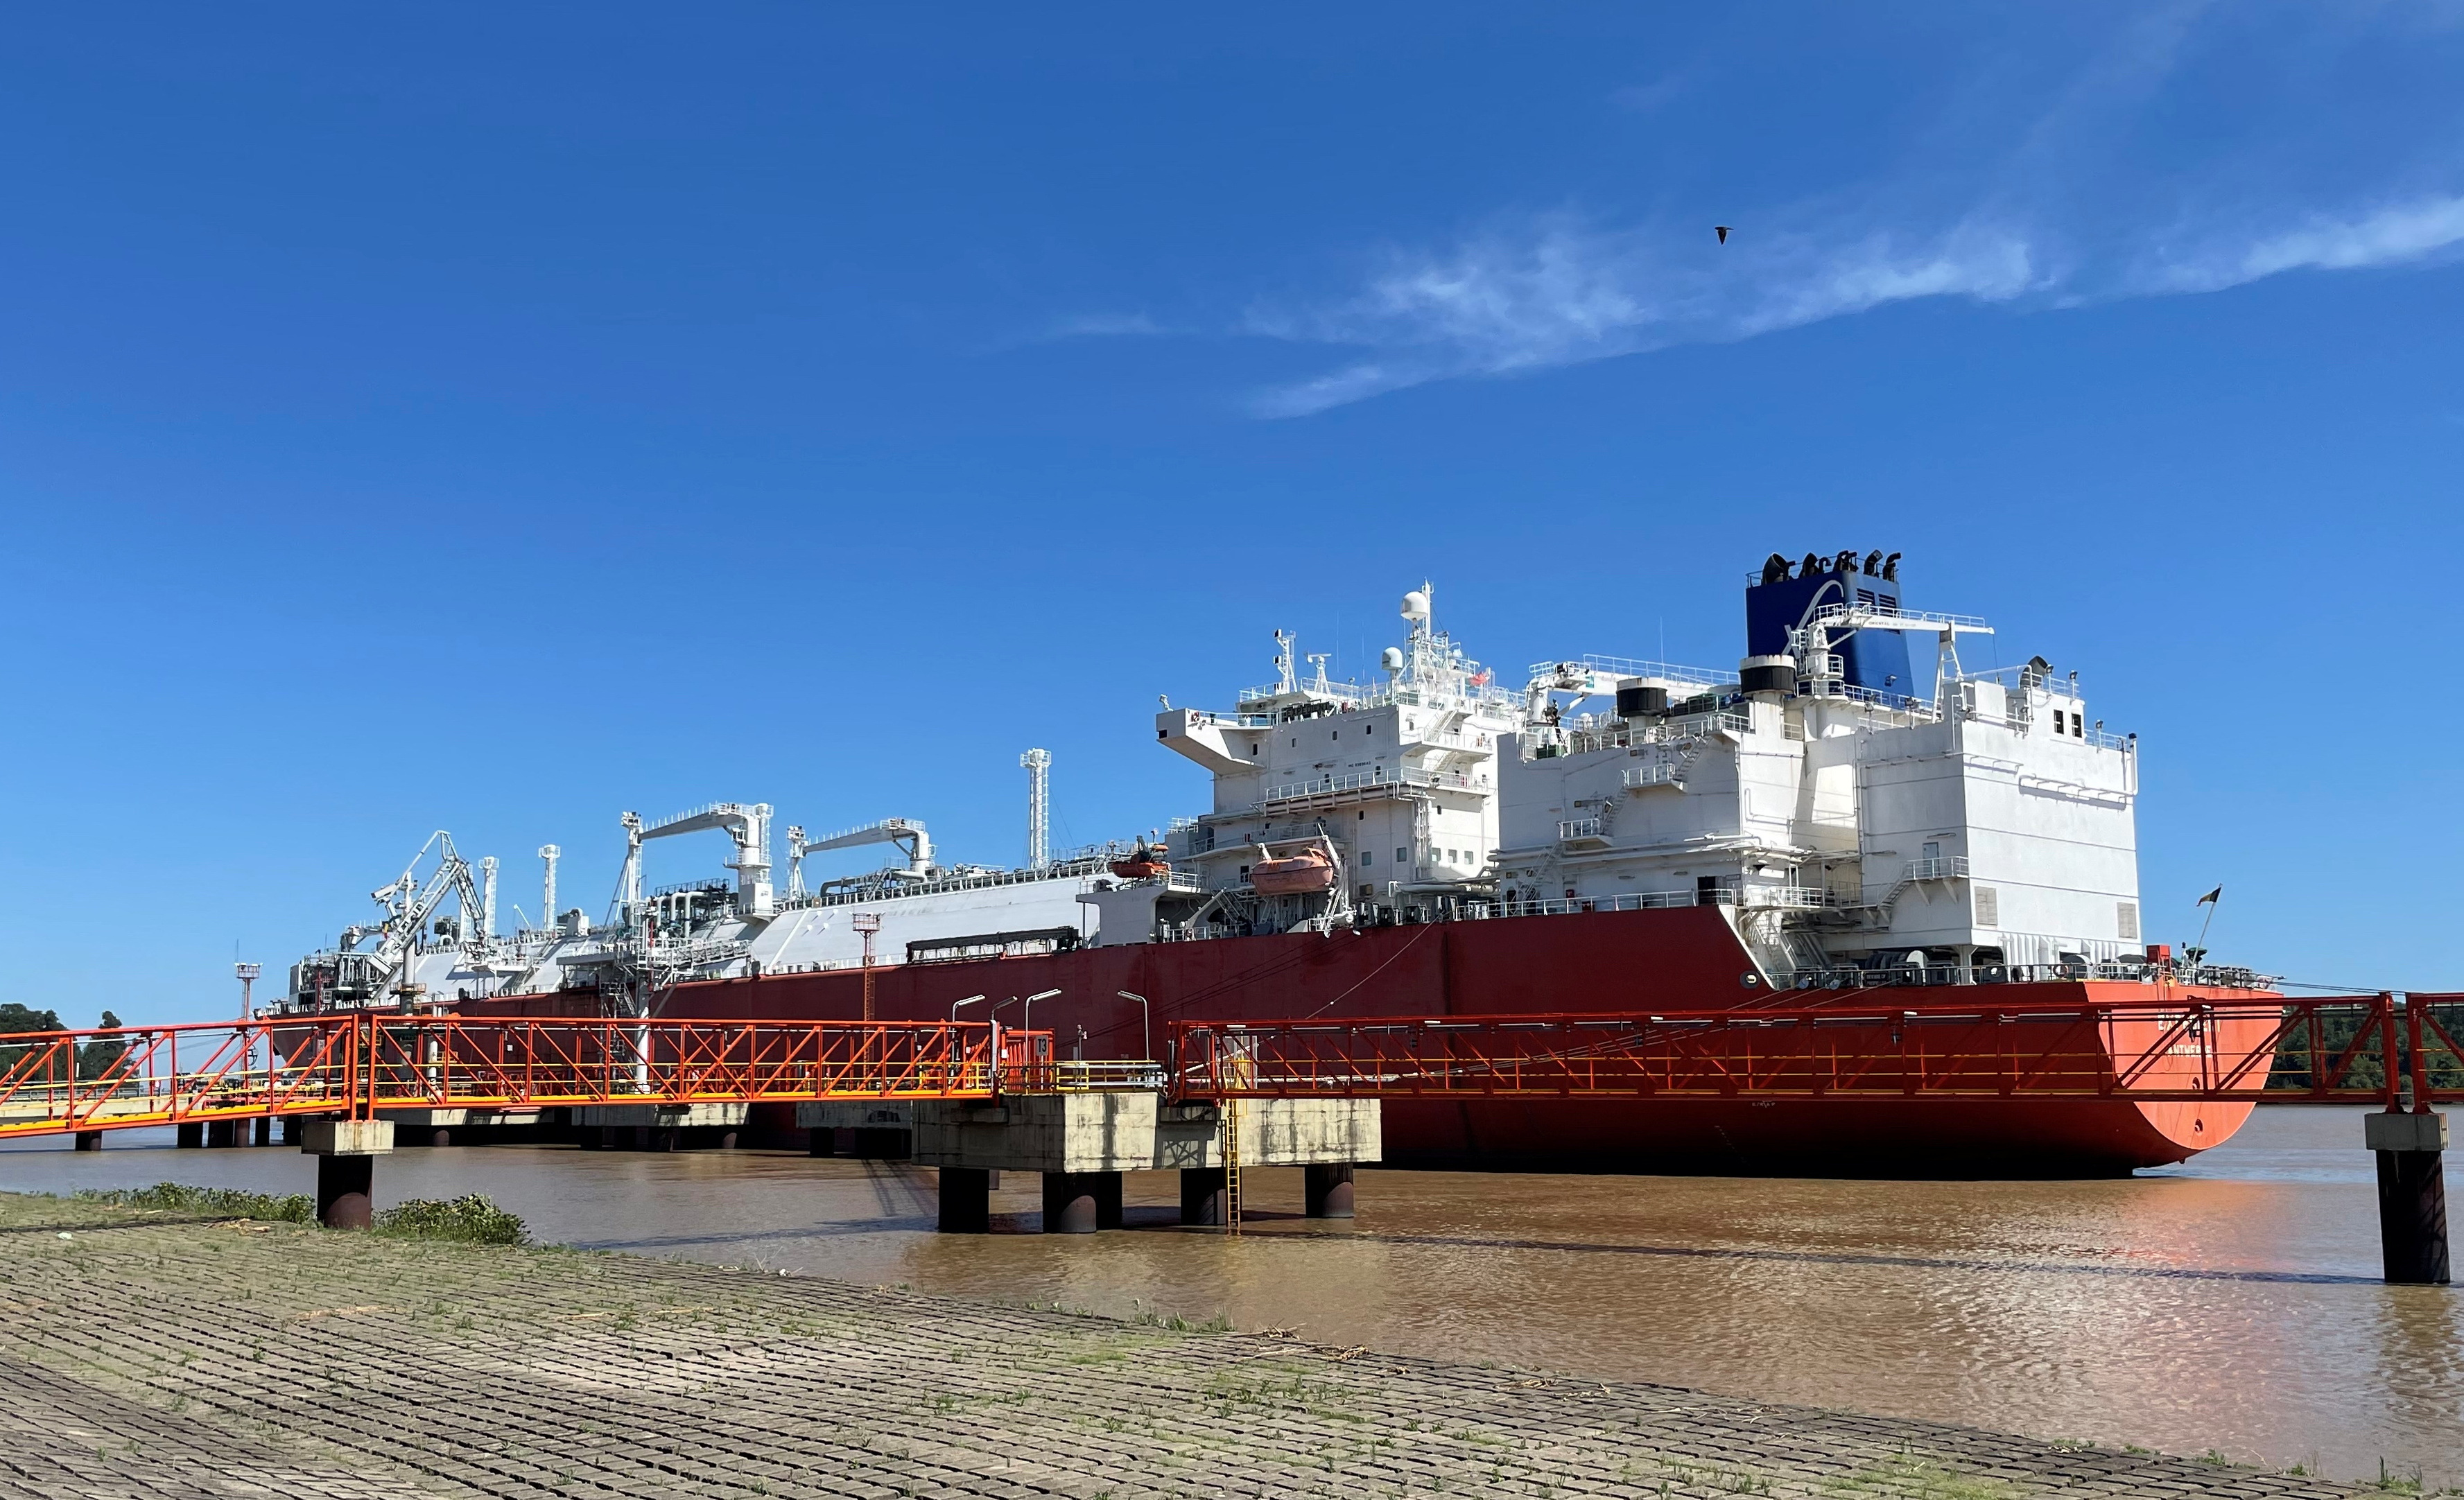 Excelerate Energy's LNG plant in Argentina could be completed by 2025, says executive | Reuters